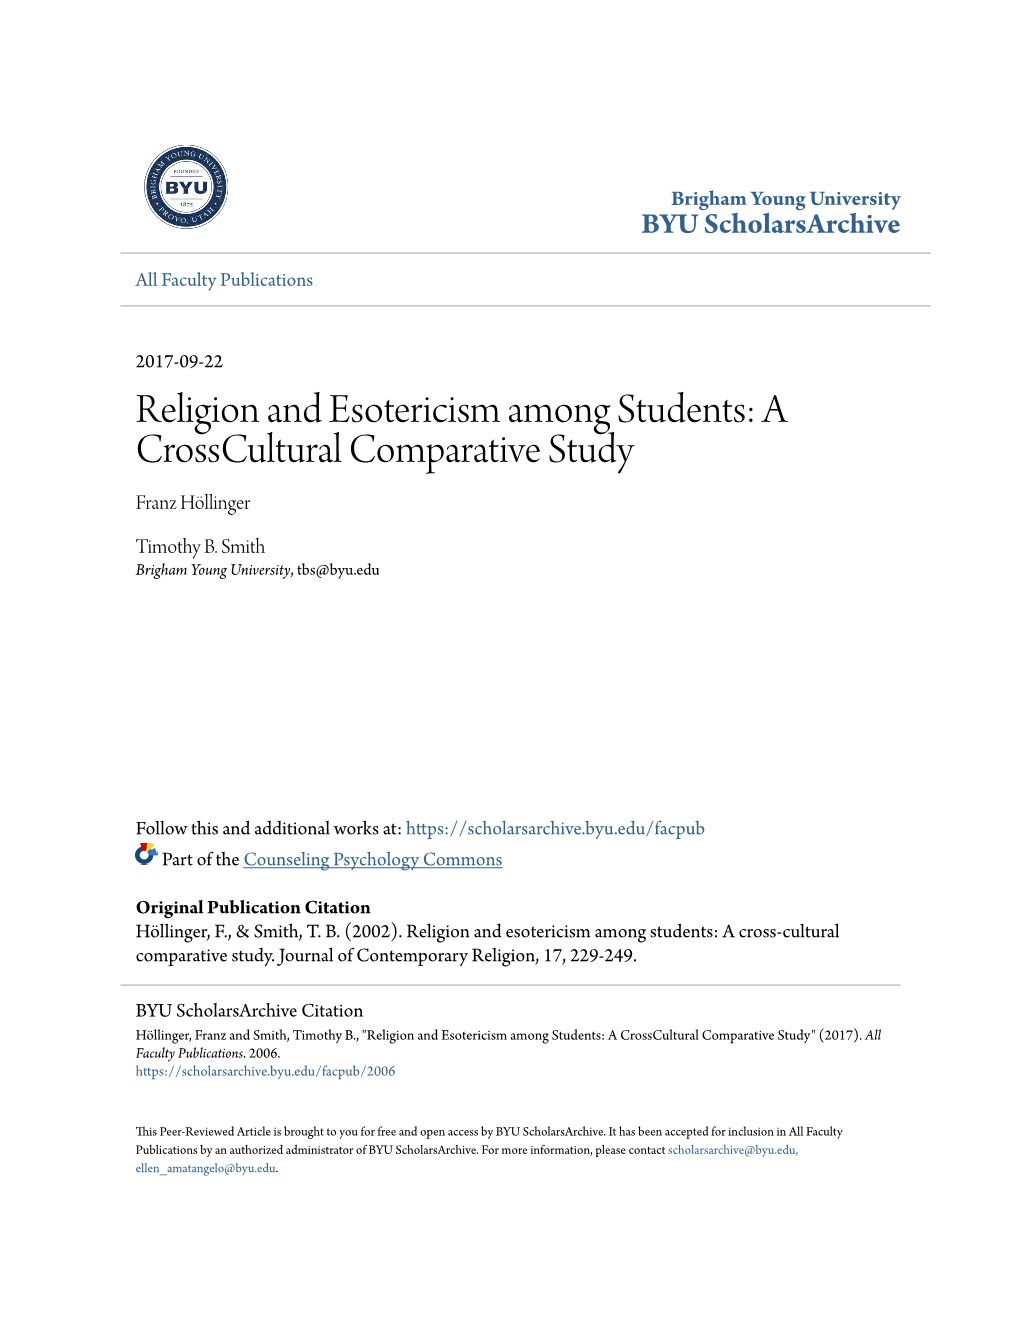 Religion and Esotericism Among Students: a Crosscultural Comparative Study Franz Höllinger